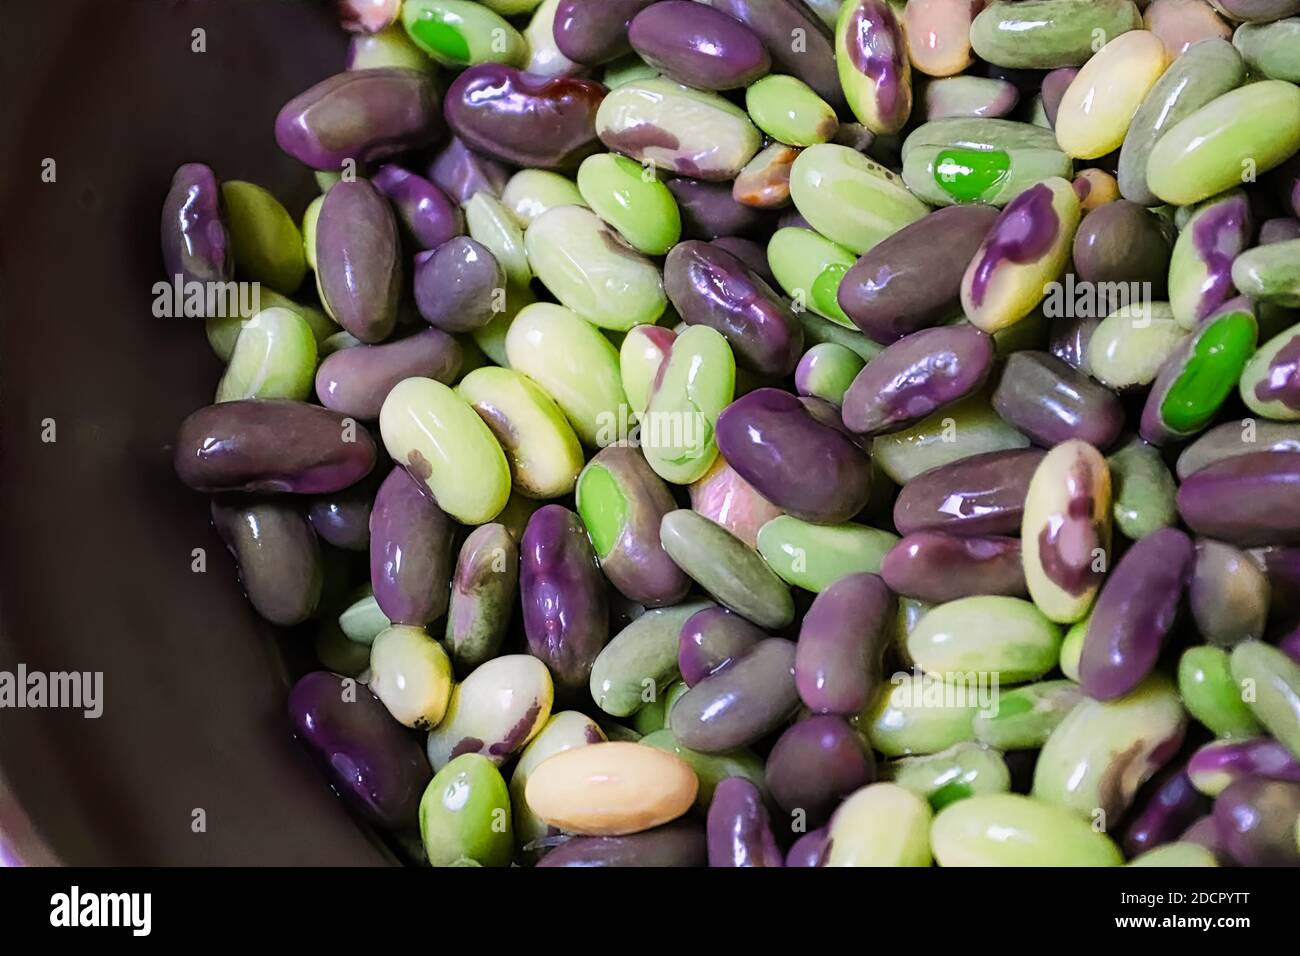 A background of green nd purple beans in a grey colander Stock Photo